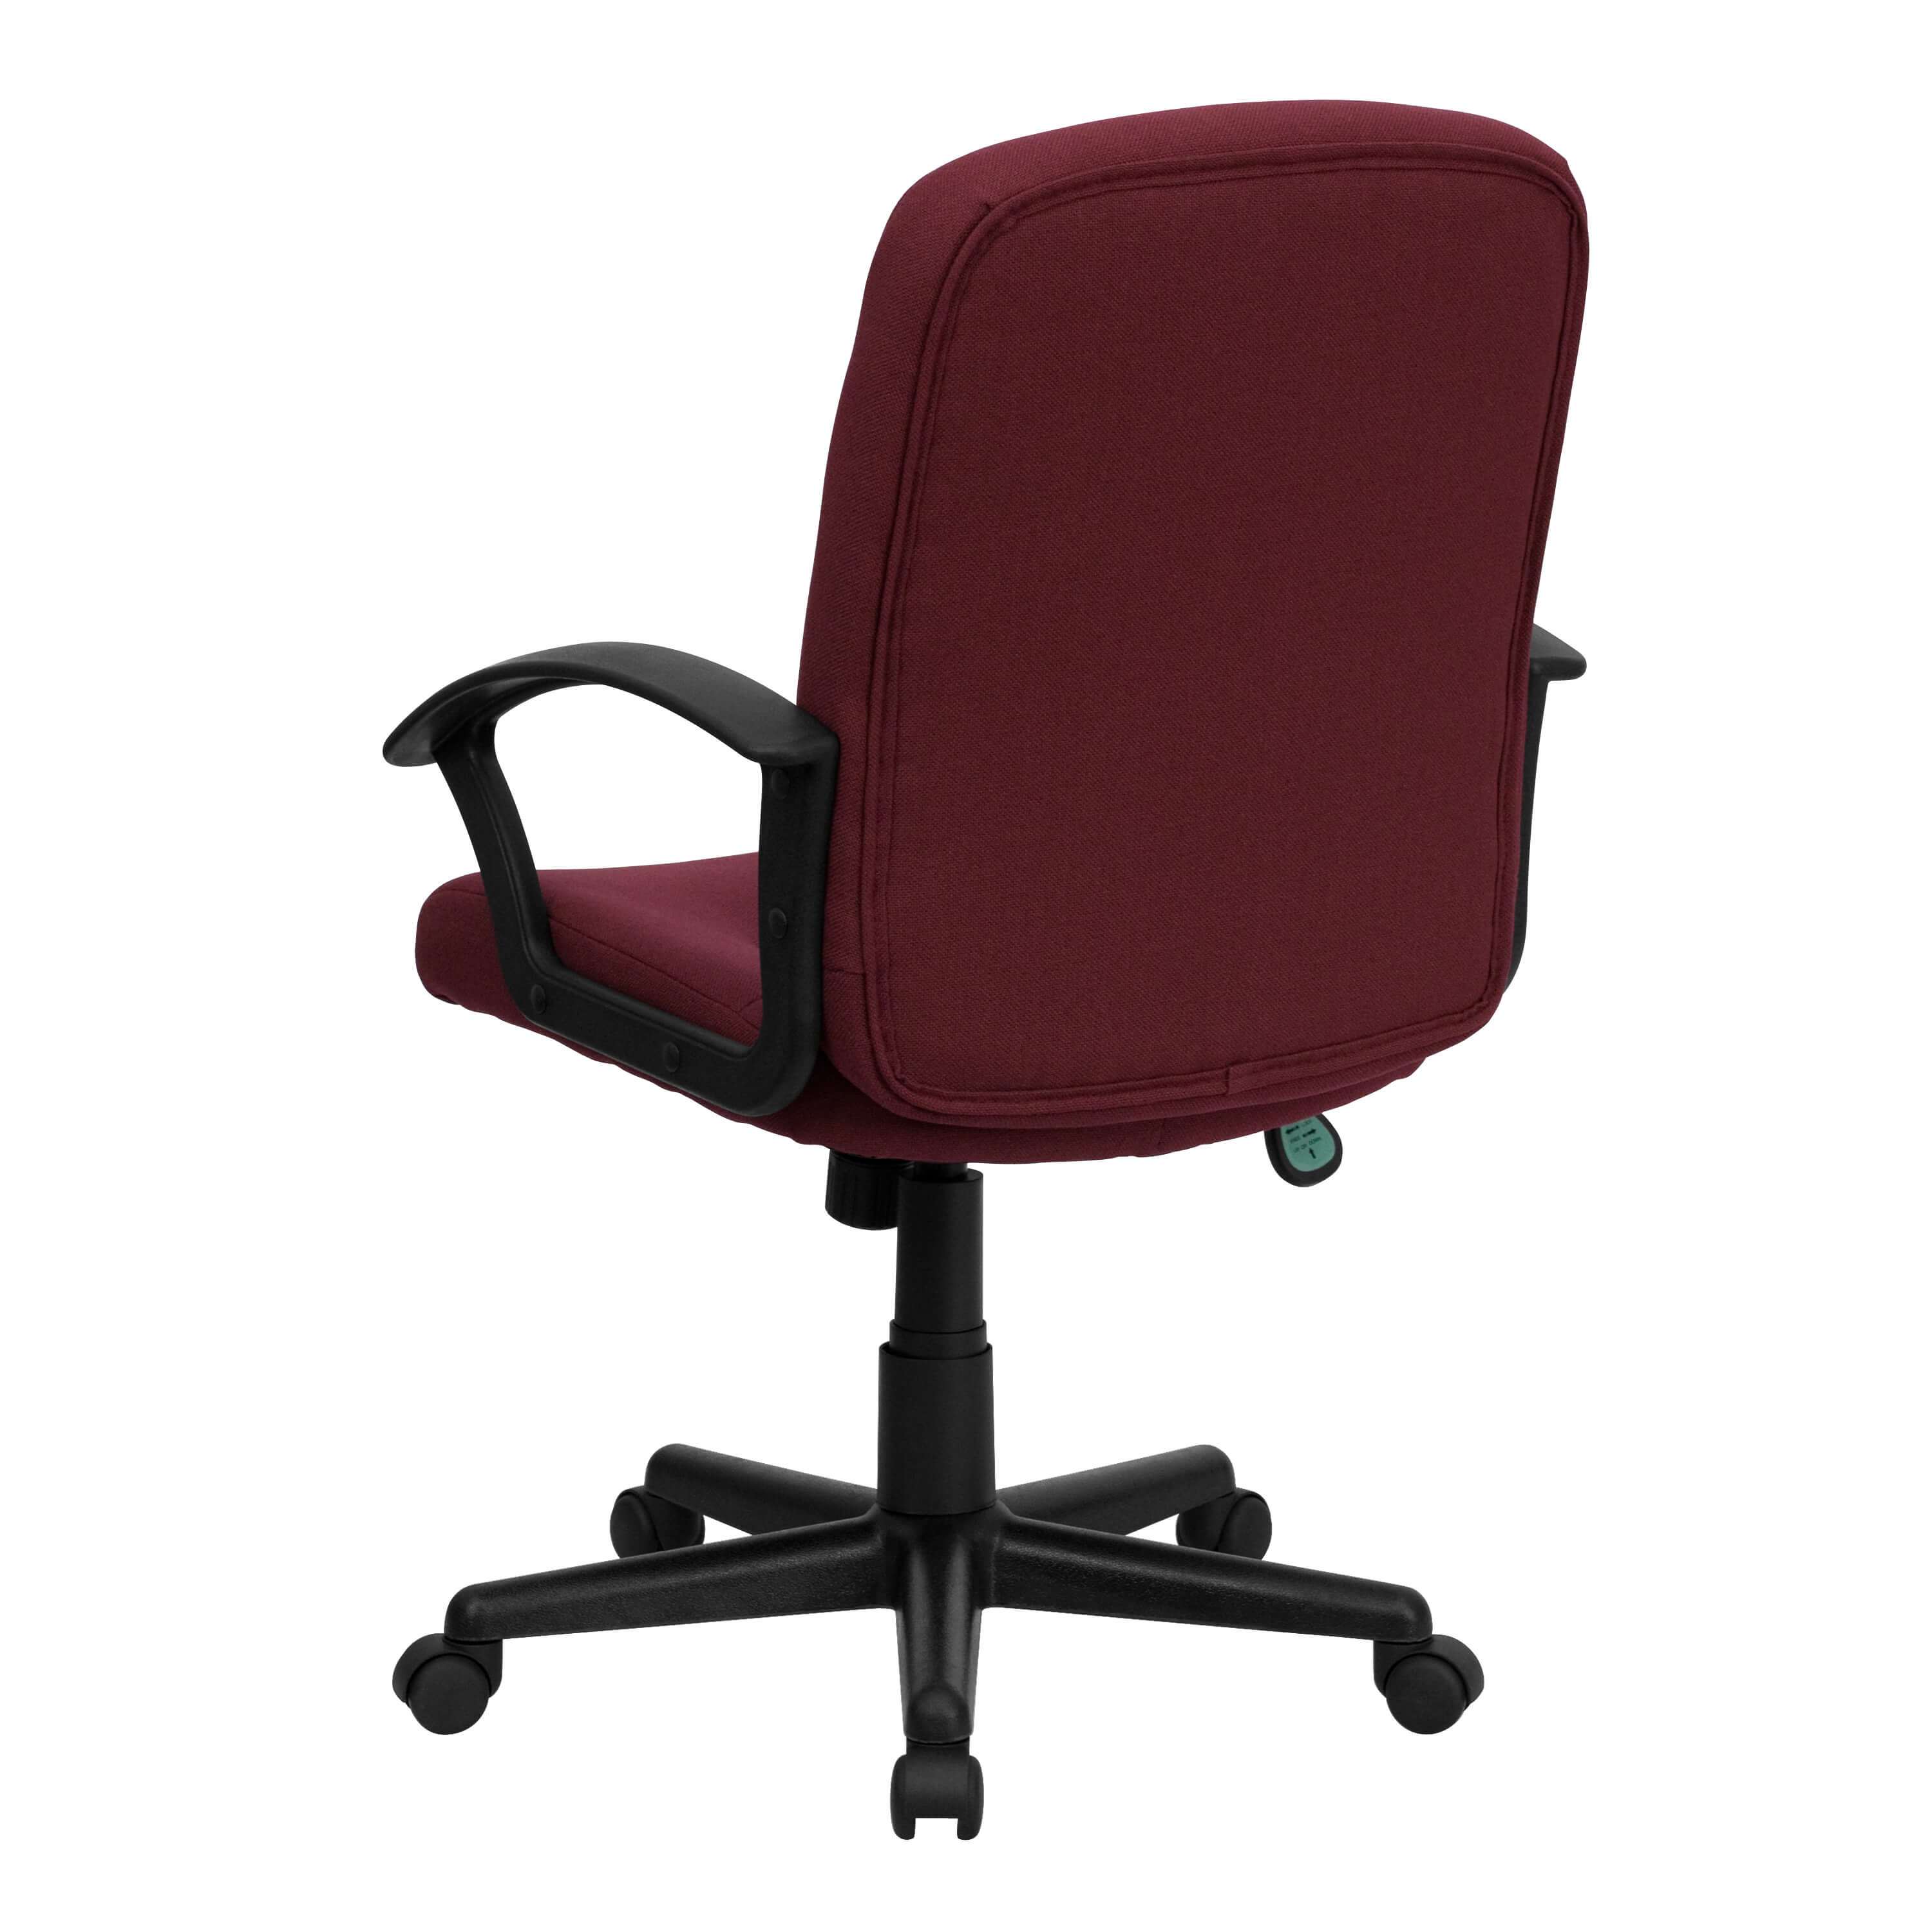 Upholstered desk chair rear view